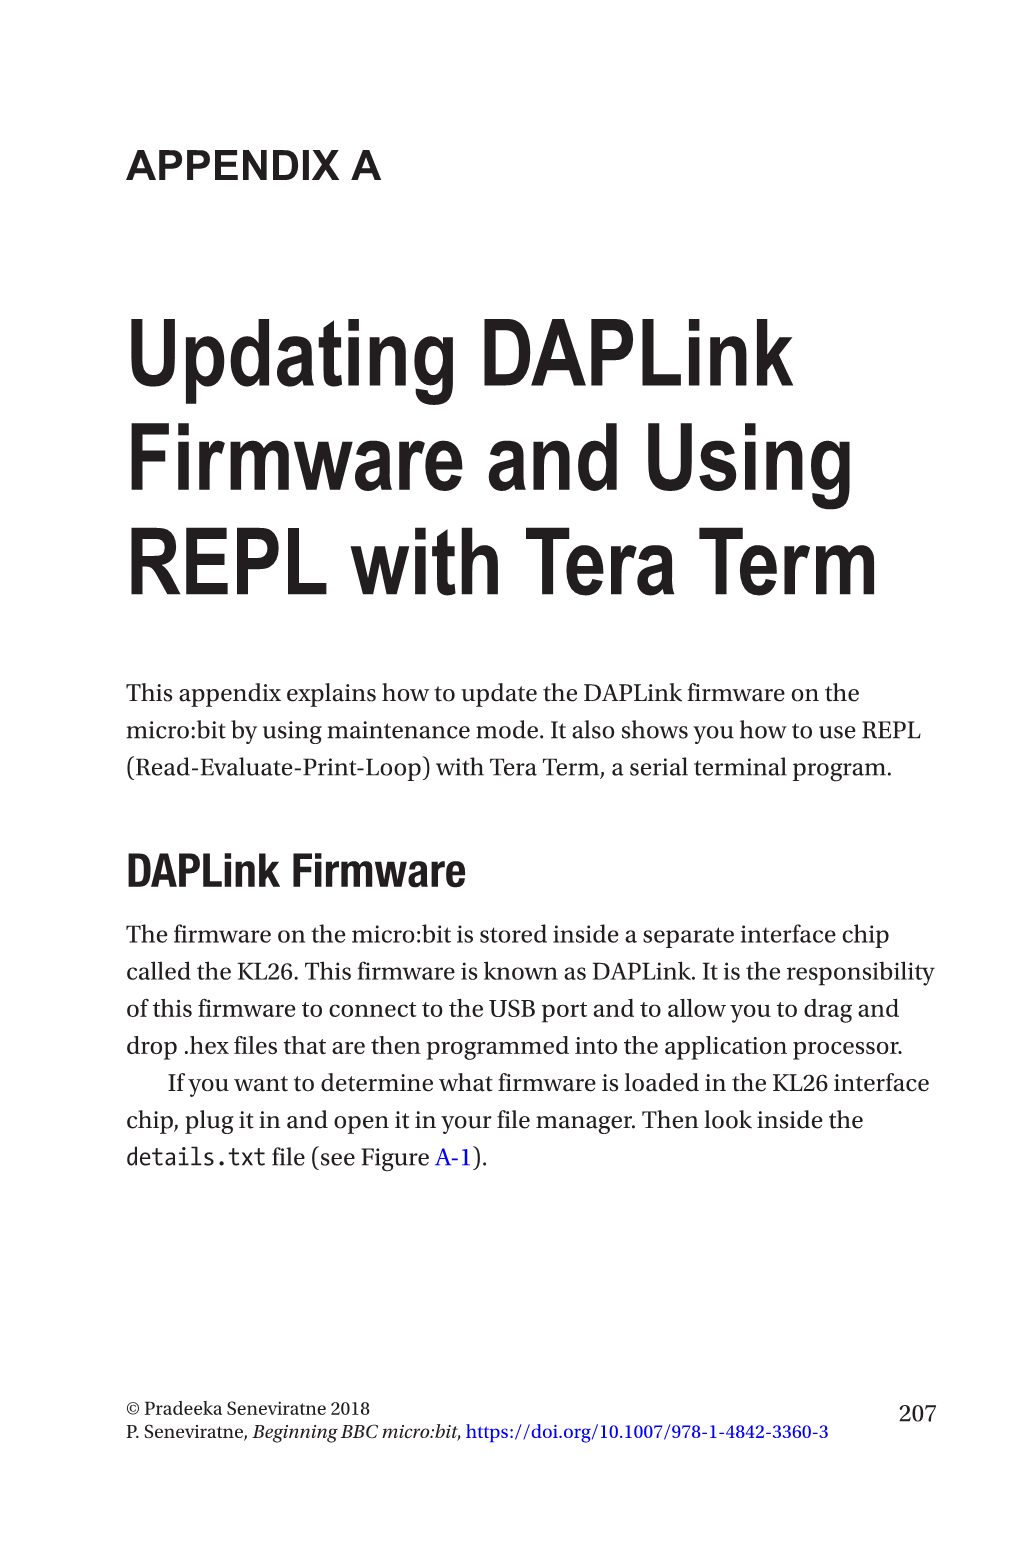 Updating Daplink Firmware and Using REPL with Tera Term